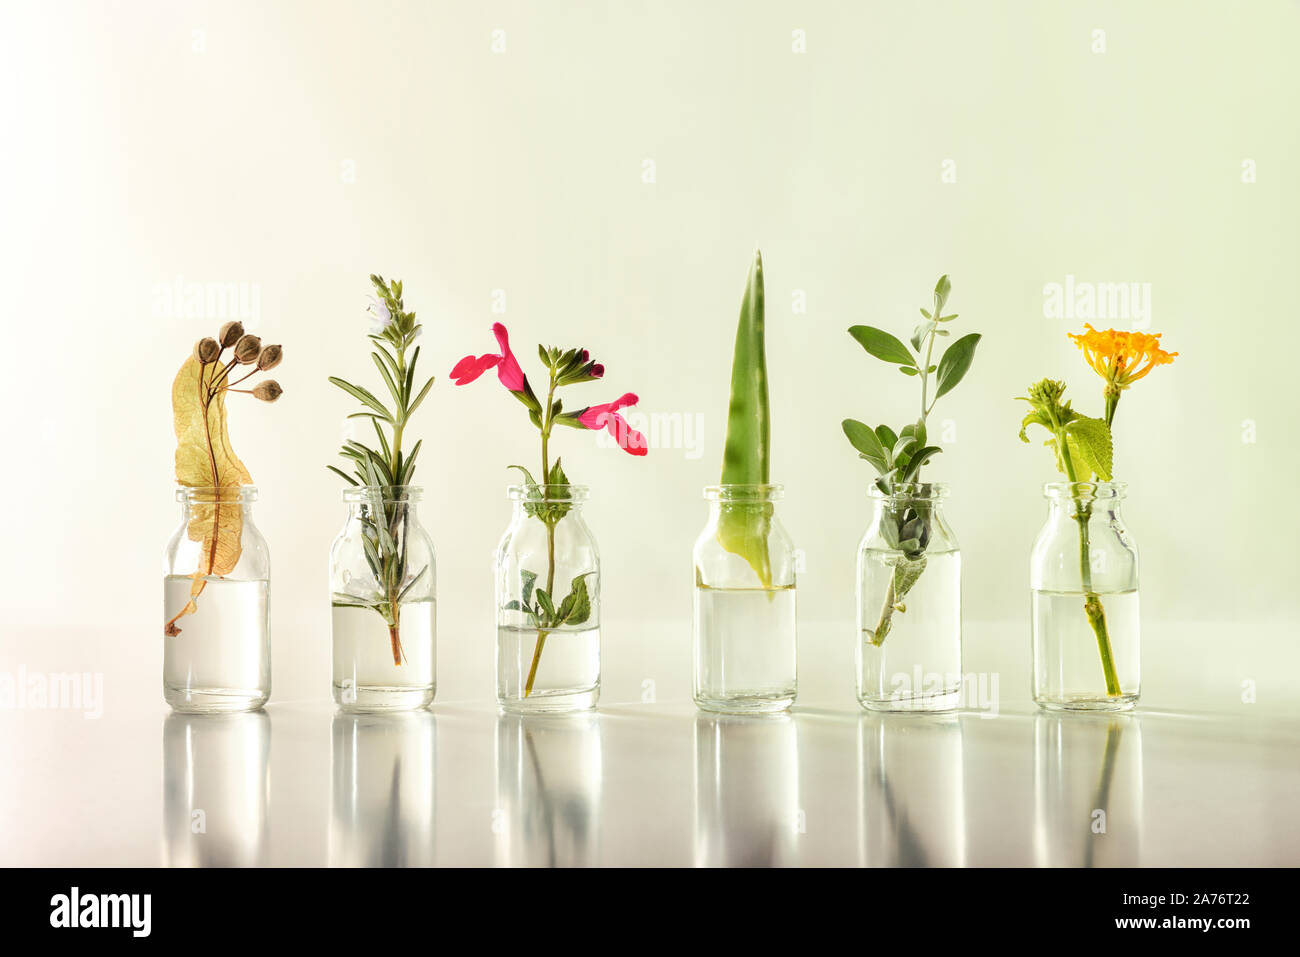 Bottles with essence liquid with plants inside on white table and isolated green gradient background. Alternative natural medicine concept. Front view Stock Photo